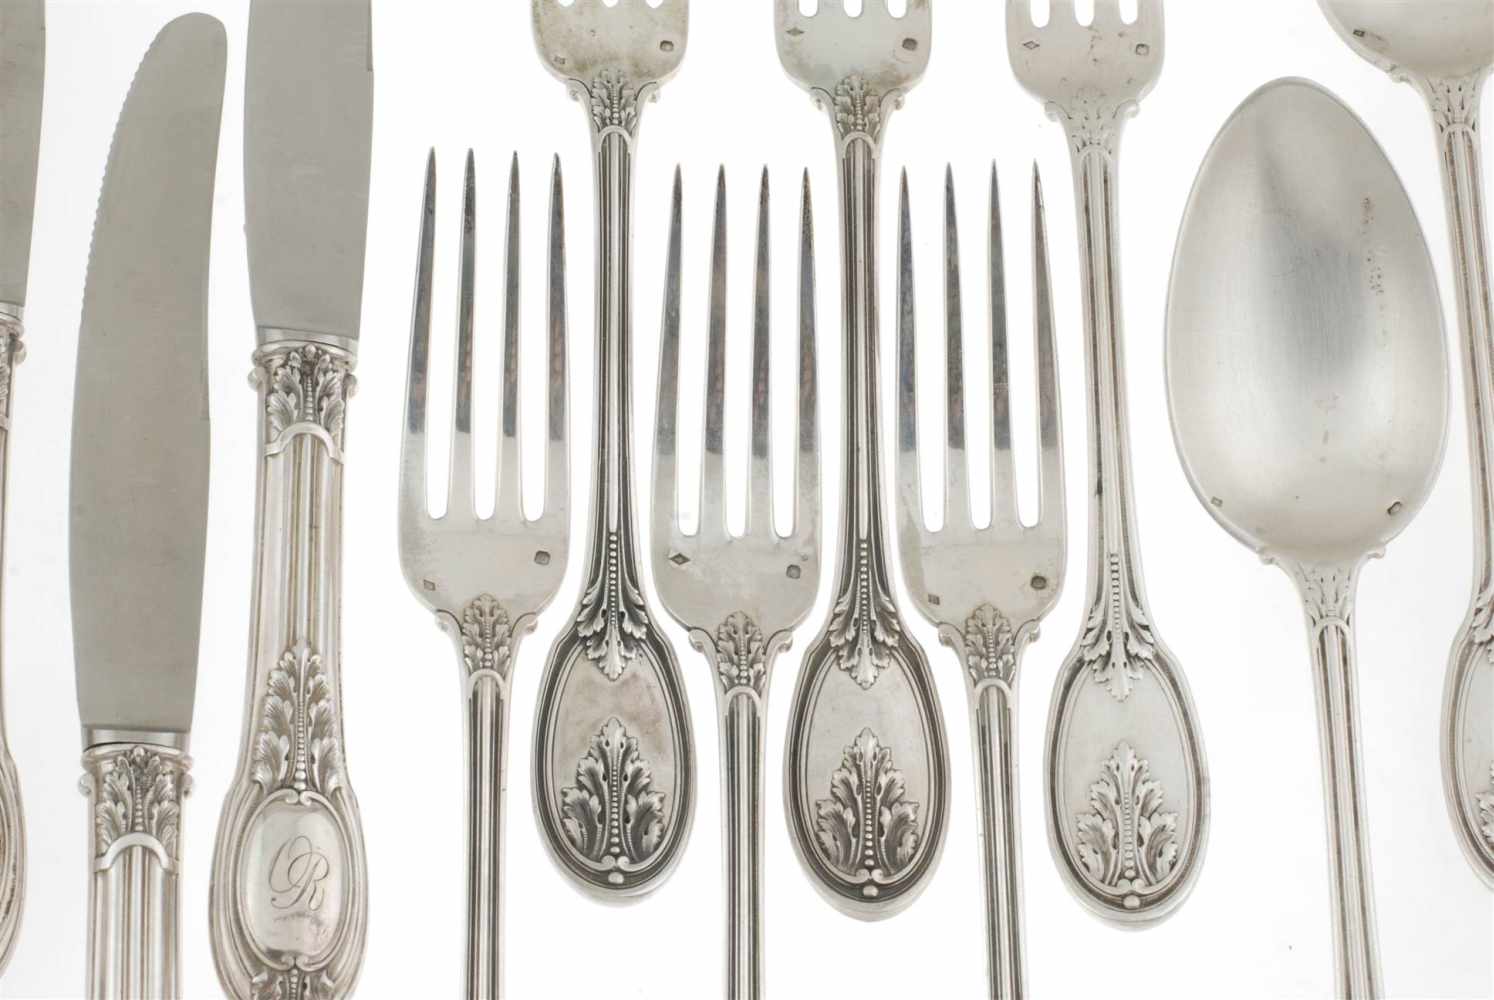 SET OF FRENCH MAISON ODIOT CUTLERY, MID C20th.Canteen comprises 6 forks, 2 spoons, 4 table knives. - Image 2 of 2